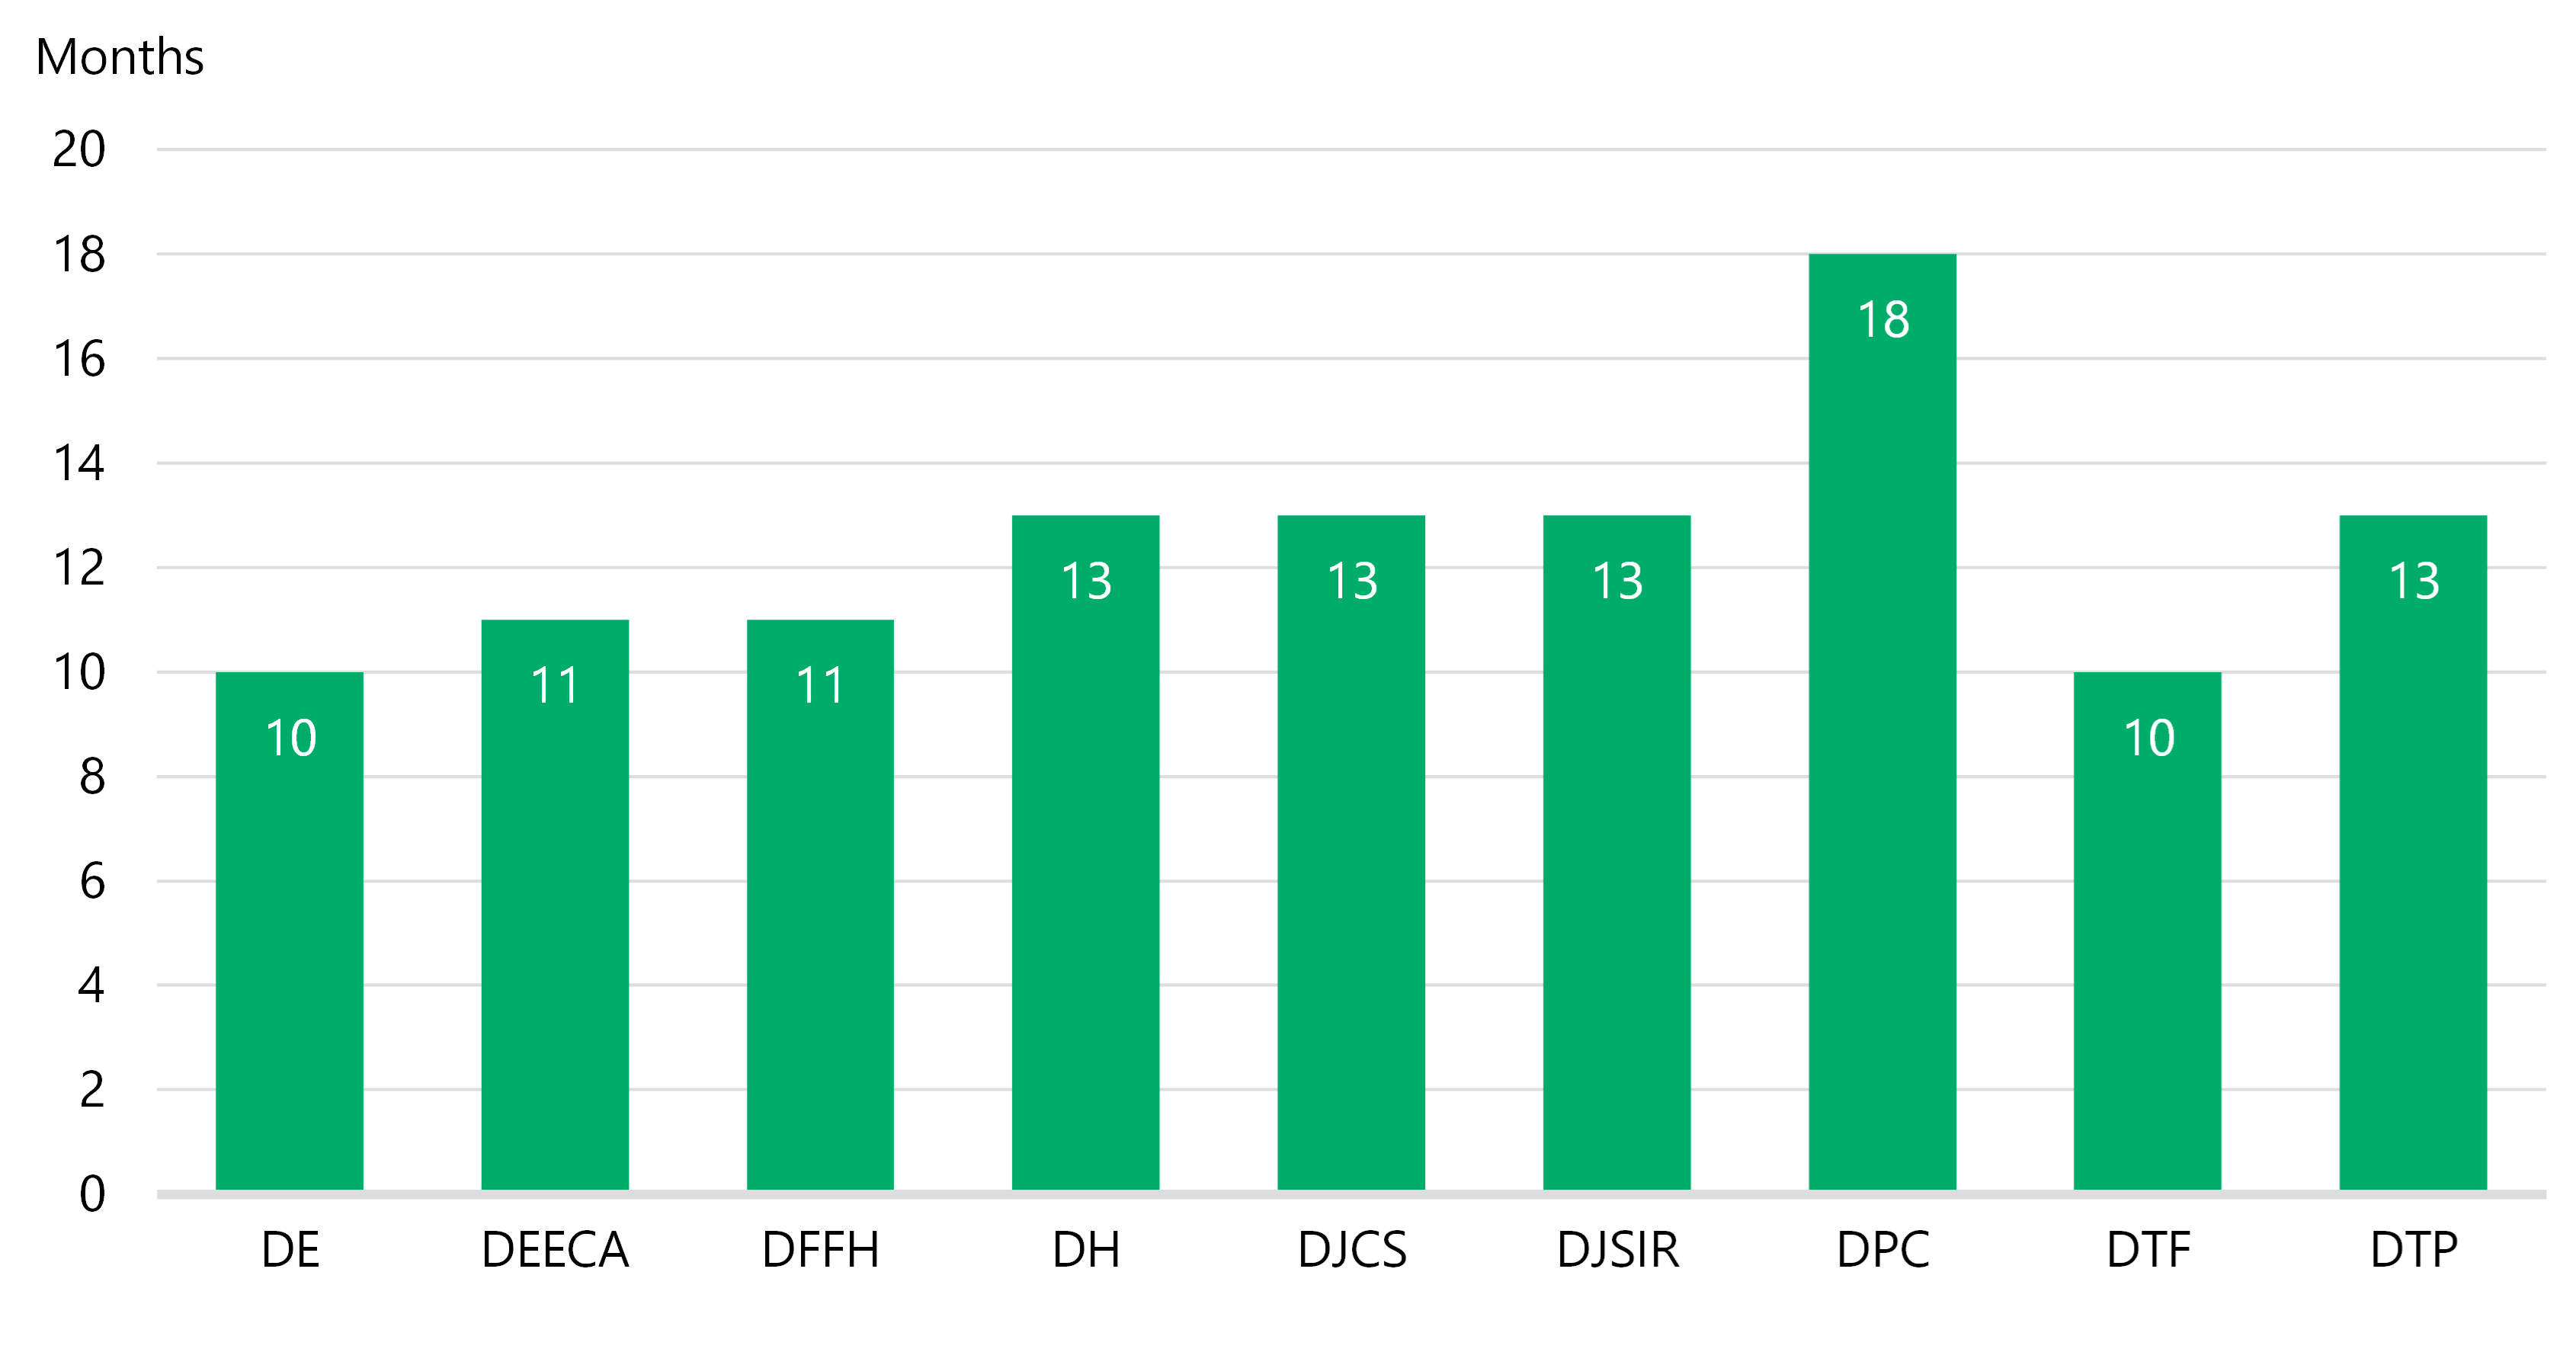 Bar chart showing median months to complete a recommendation, by department. The figures are DE 10, DEECA 11, DFFH 11, DH 13, DJCS 13, DJSIR 13, DPC 18, DTF 10 and DTP 13.